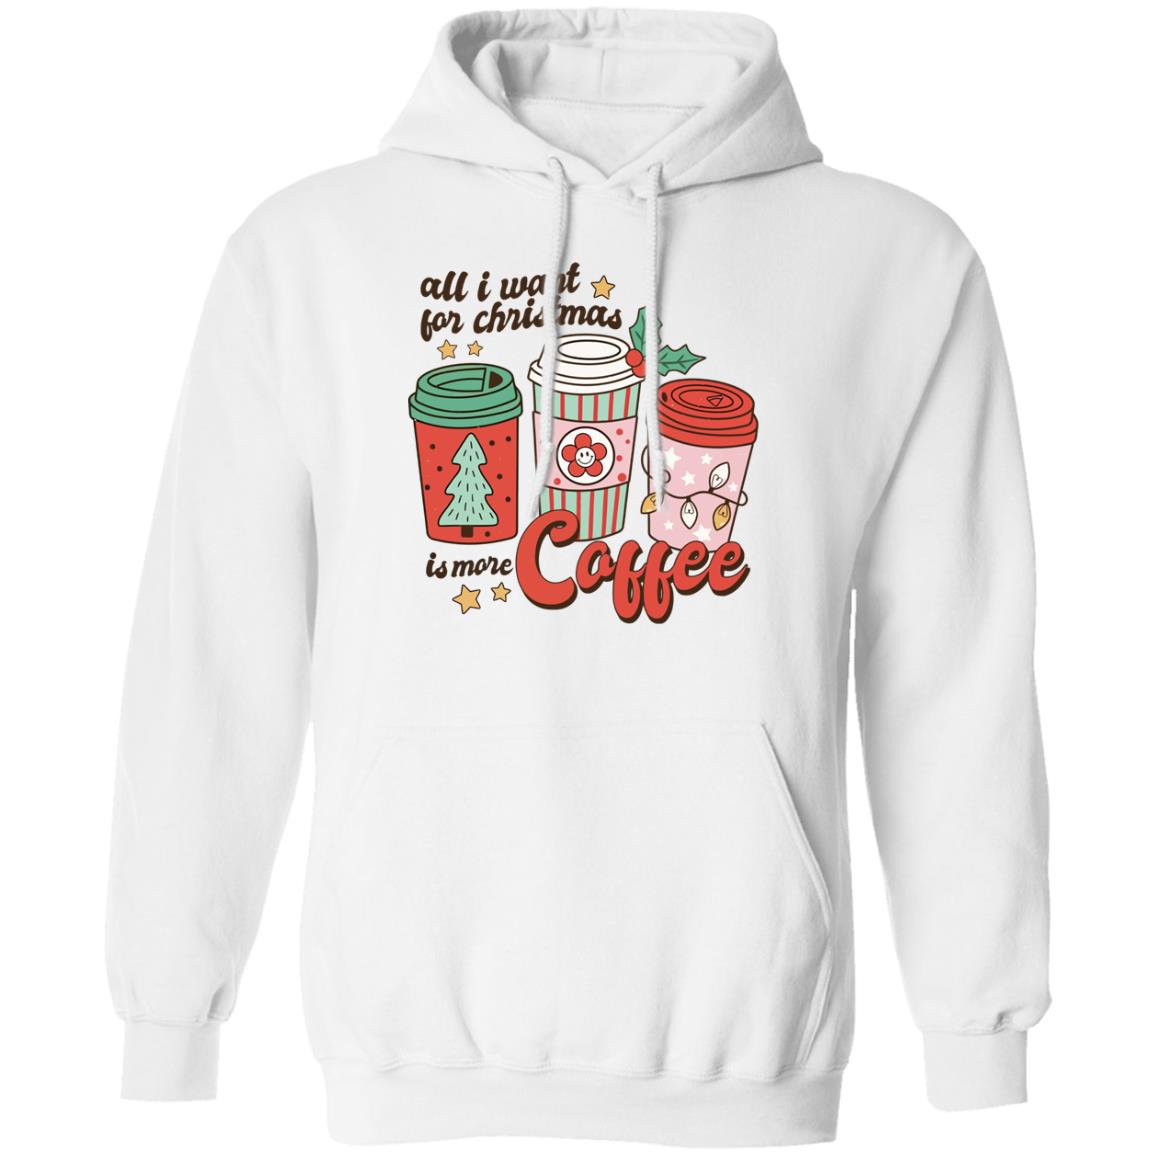 All I Want For Christmas Is More Coffee Christmas Sweater 1